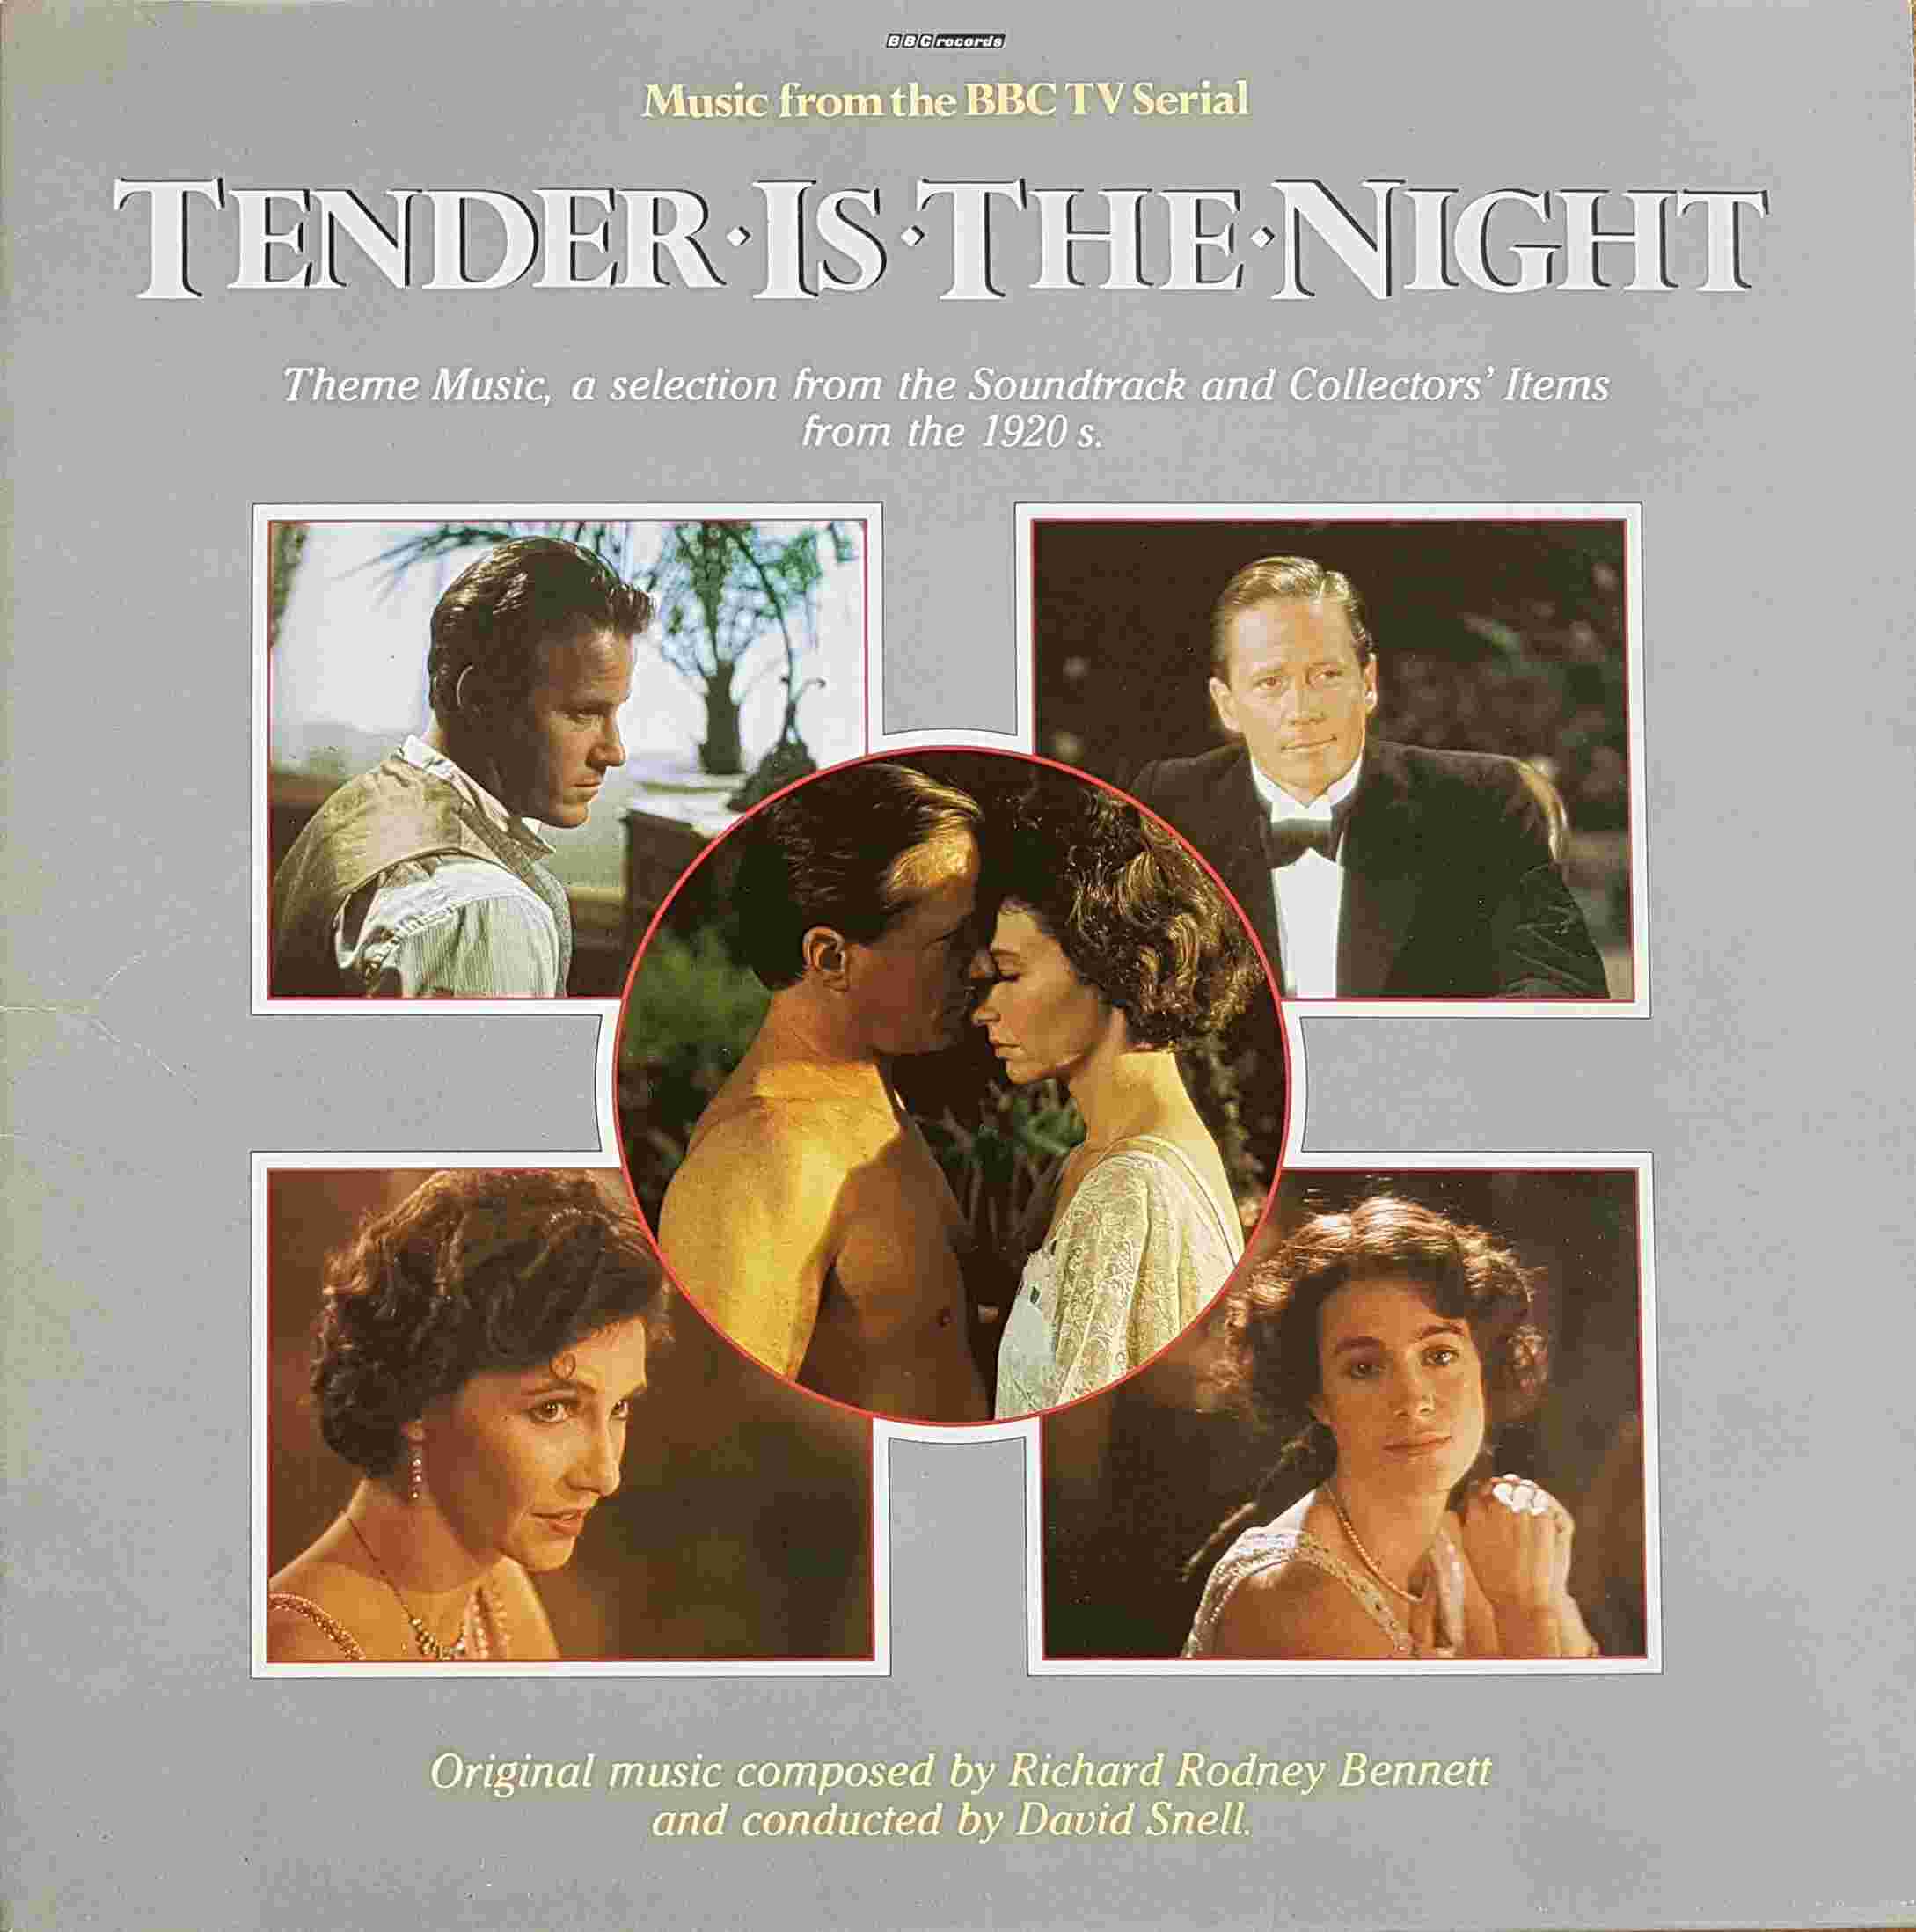 Picture of REB 582 Tender is the night by artist Various from the BBC albums - Records and Tapes library